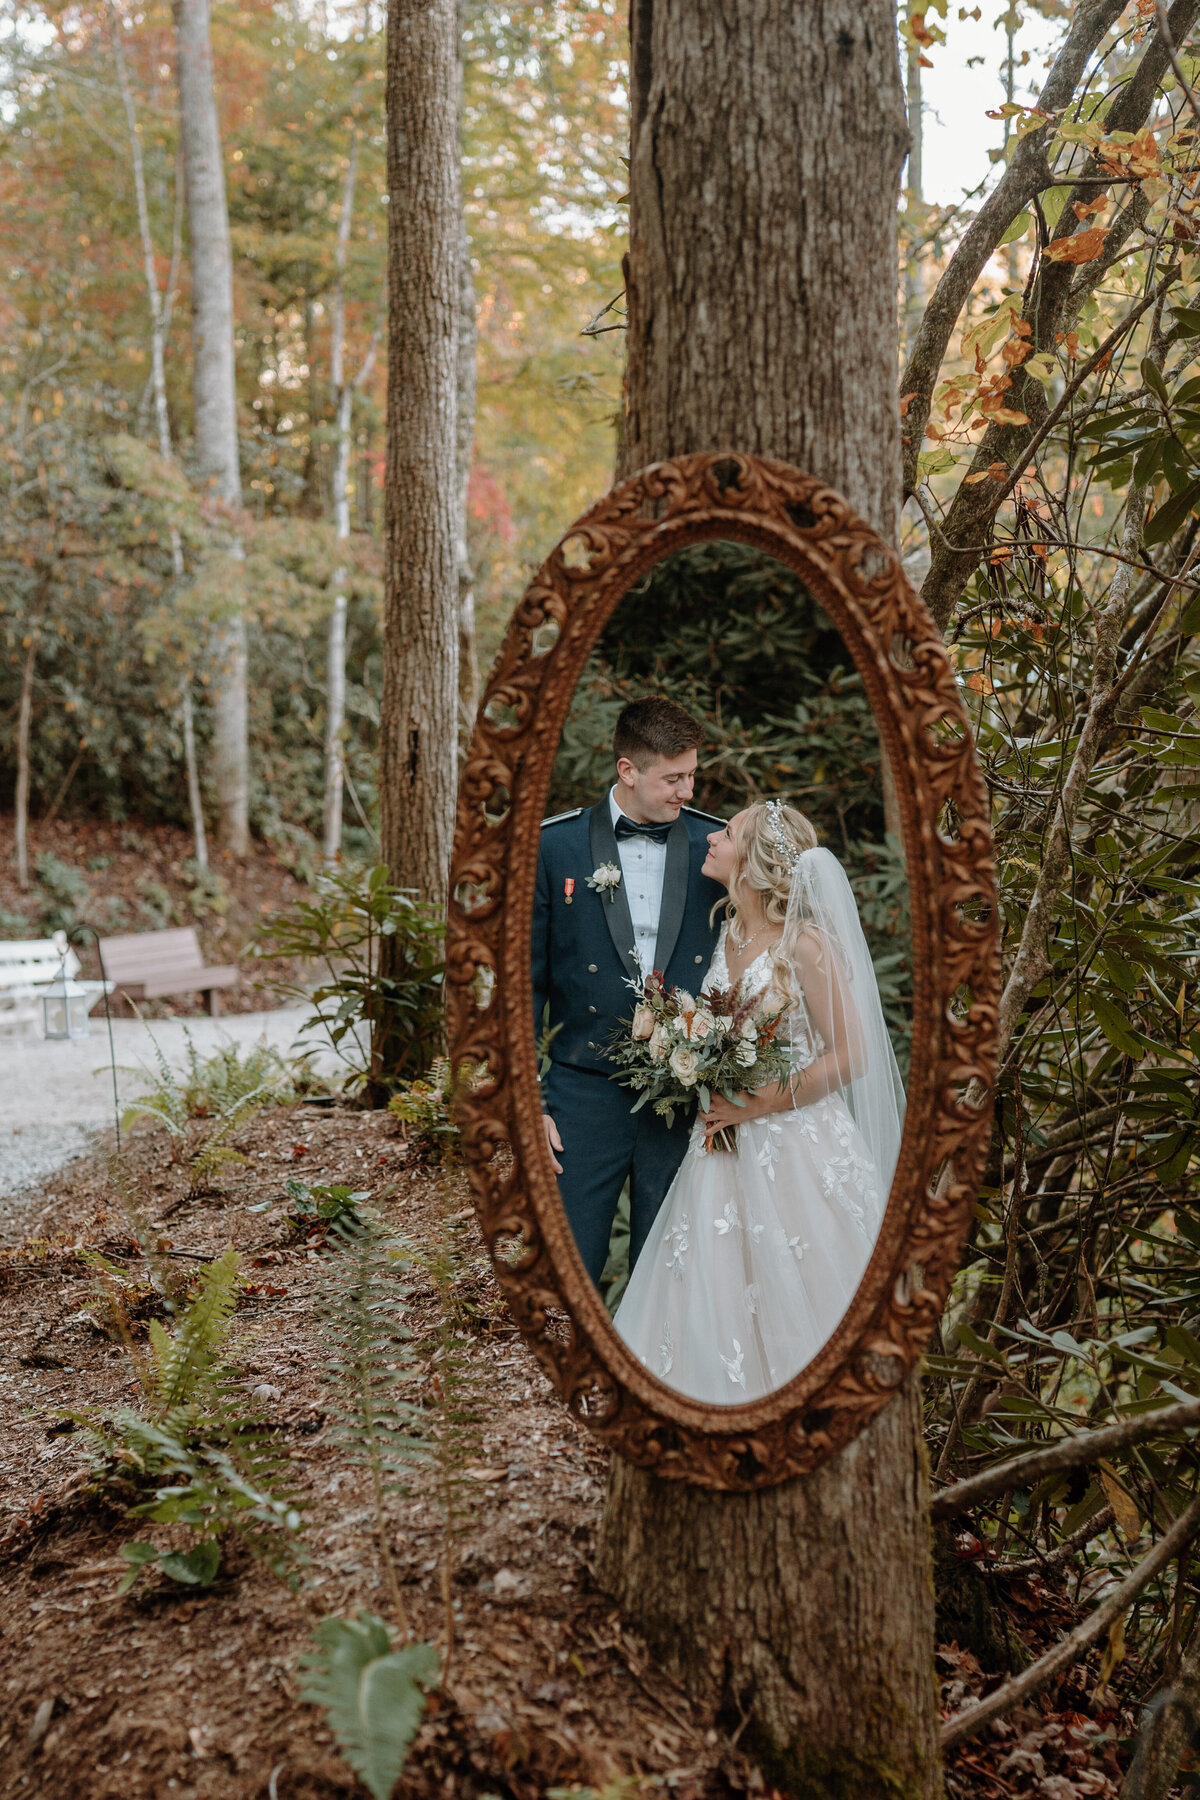 reflection in a mirror of groom in uniform smiling at bride